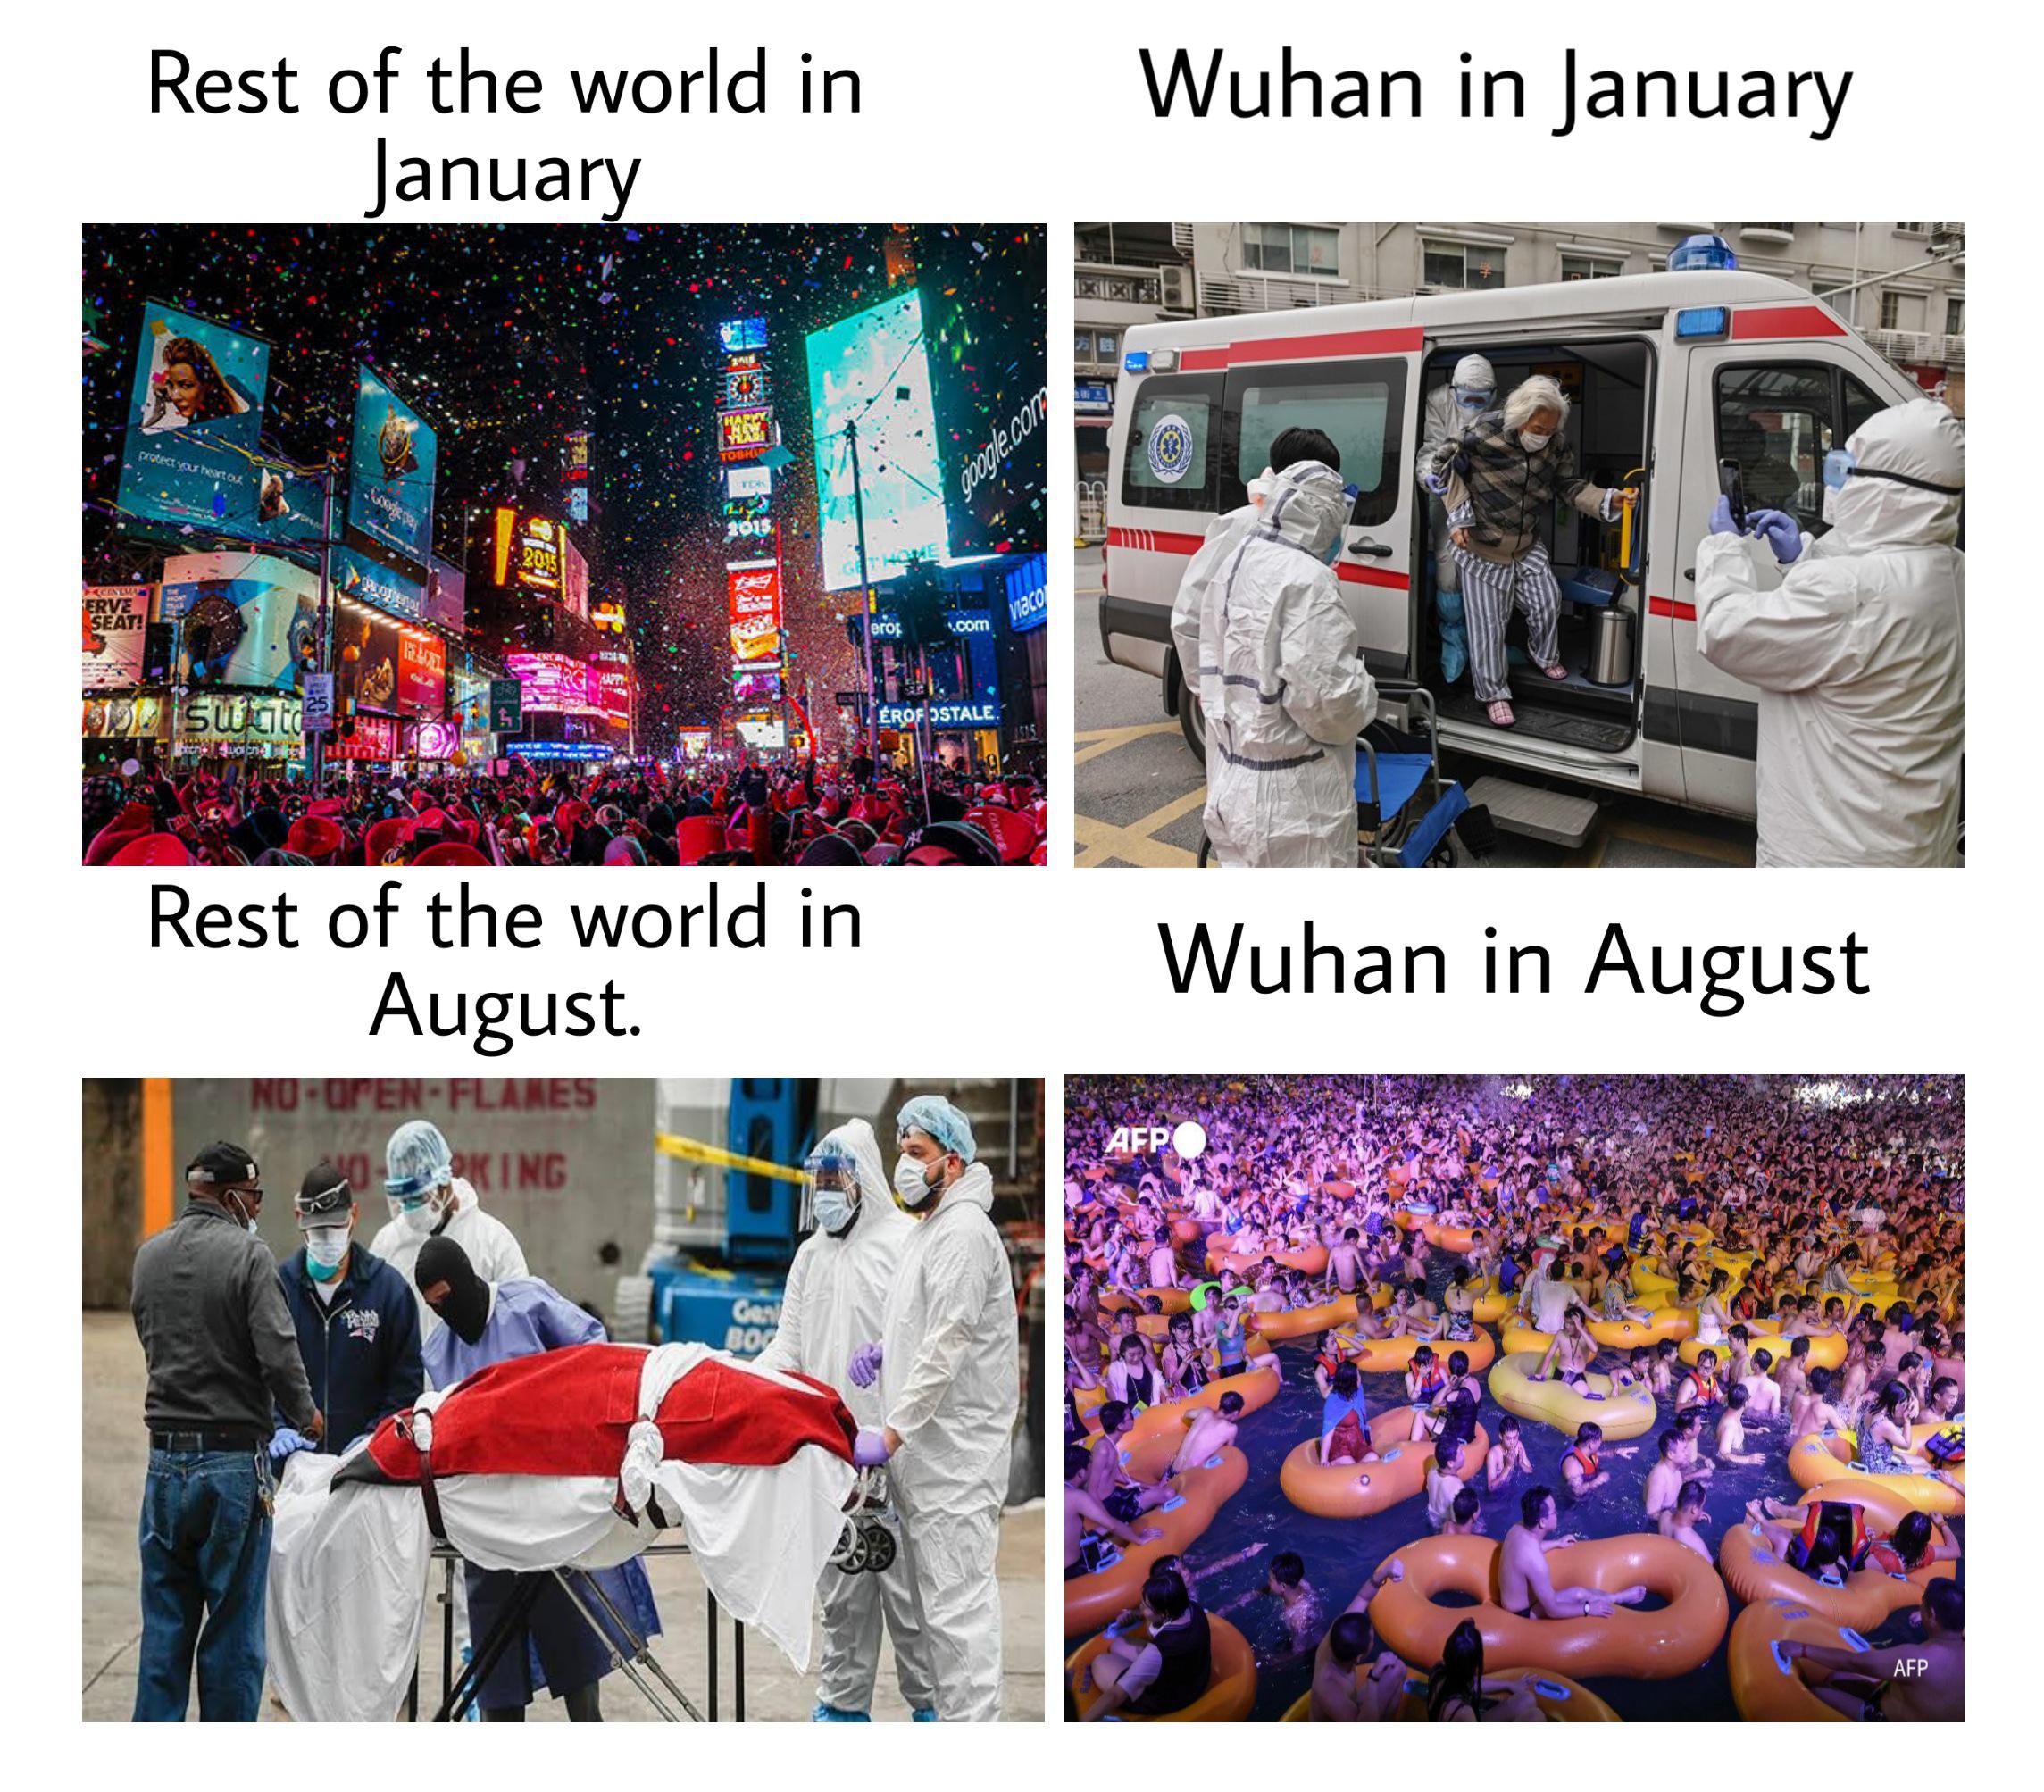 dank memes - crowd - Wuhan in January Rest of the world in January yer 9501 Ortale Wuhan in August Rest of the world in August En Flares Aking Afp Afp